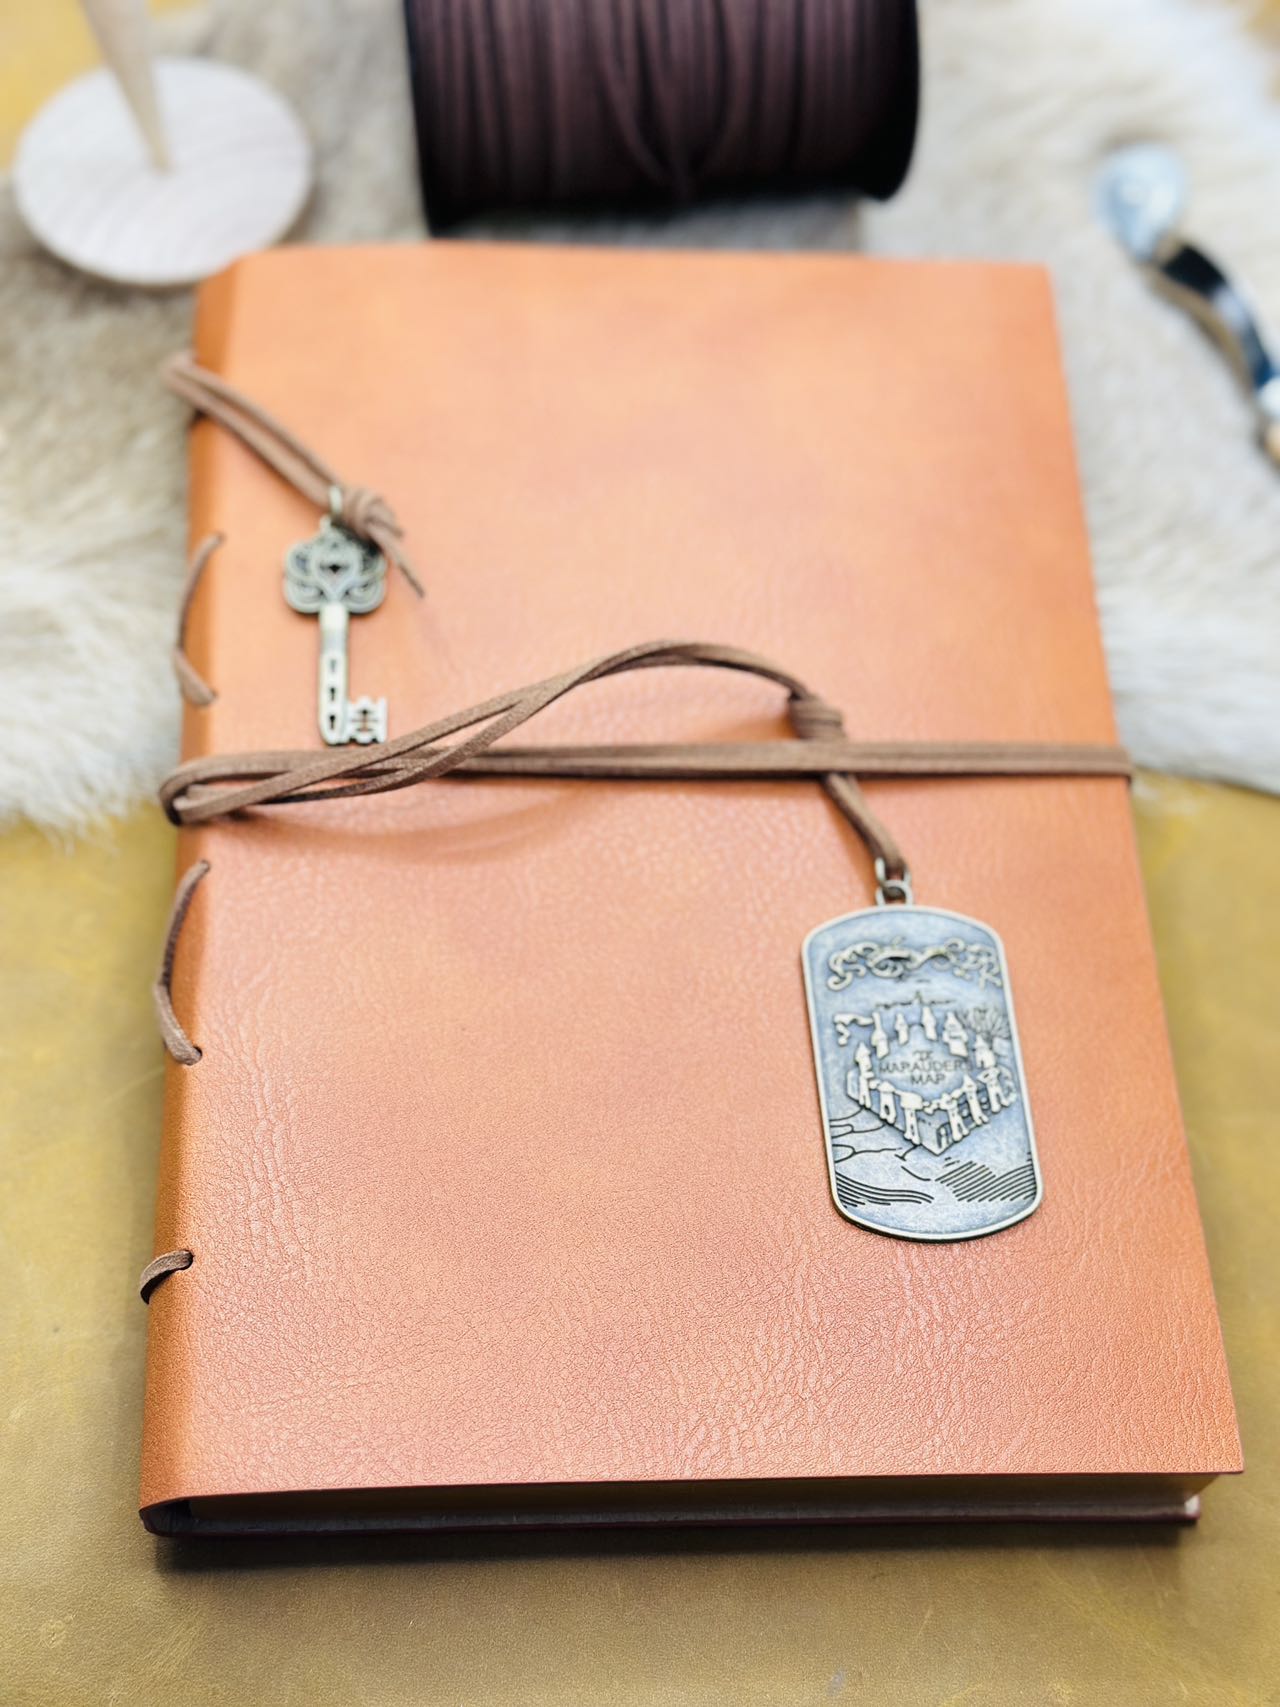 Personalised Vegan Leather Bound Journal-An Unique Graduation, Birthday, Wedding and Christmas Gift for Yourself or Your Loved ones